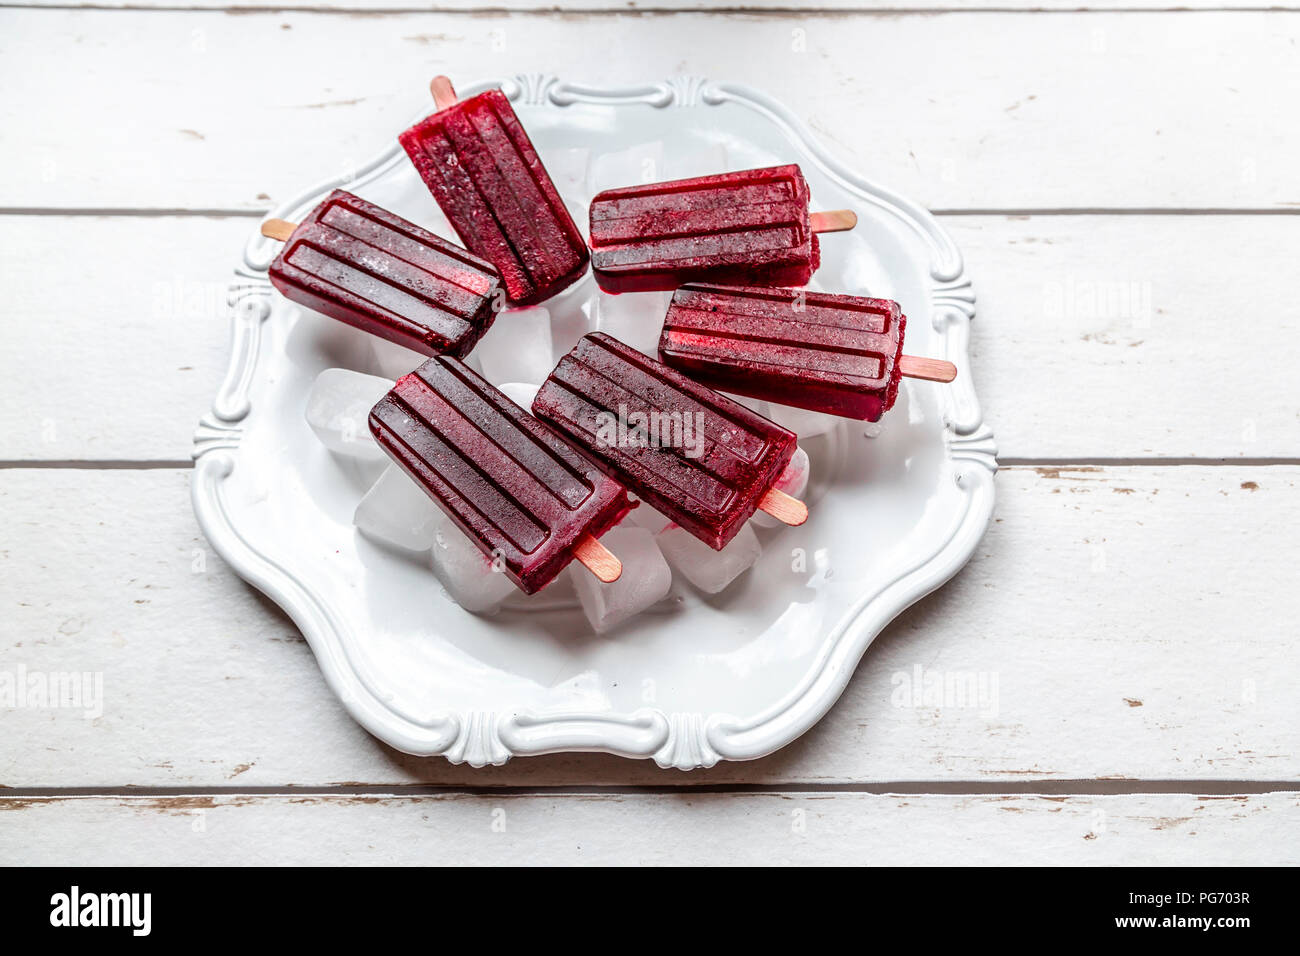 Cherry ice lollies on ice cubes and plate Stock Photo